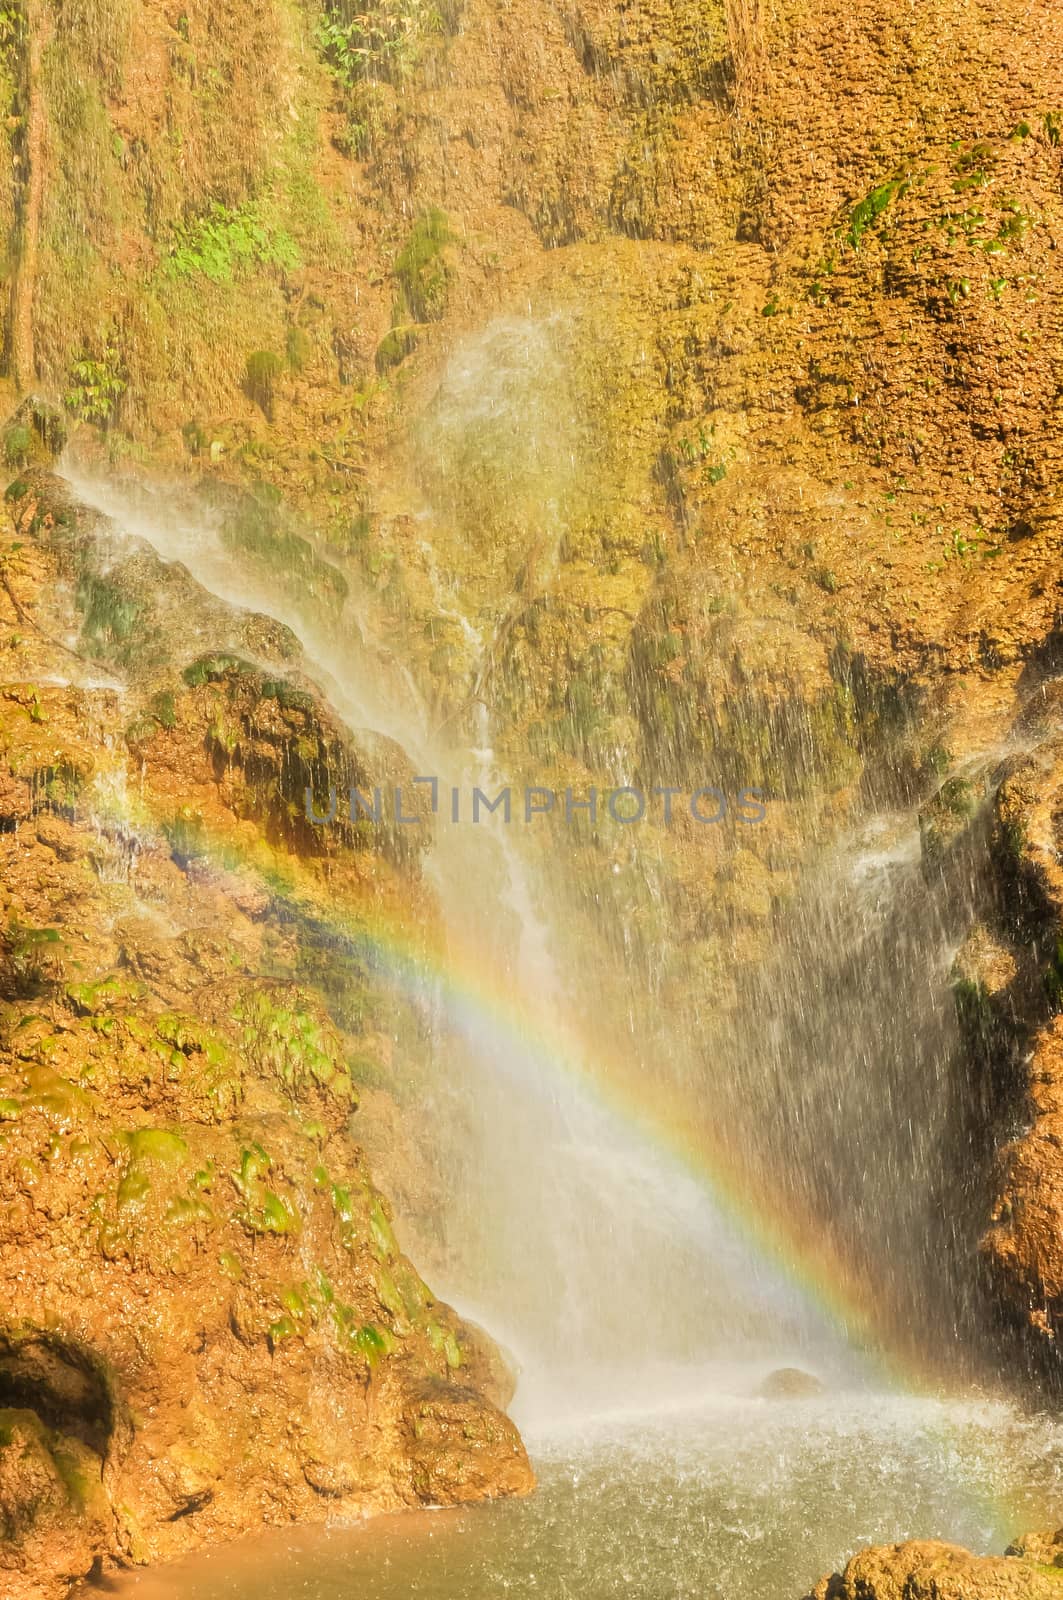 Refreshing waterfall pouring into an emerald pond and rainbow over Dai Yem (Pink Blouse) by trongnguyen